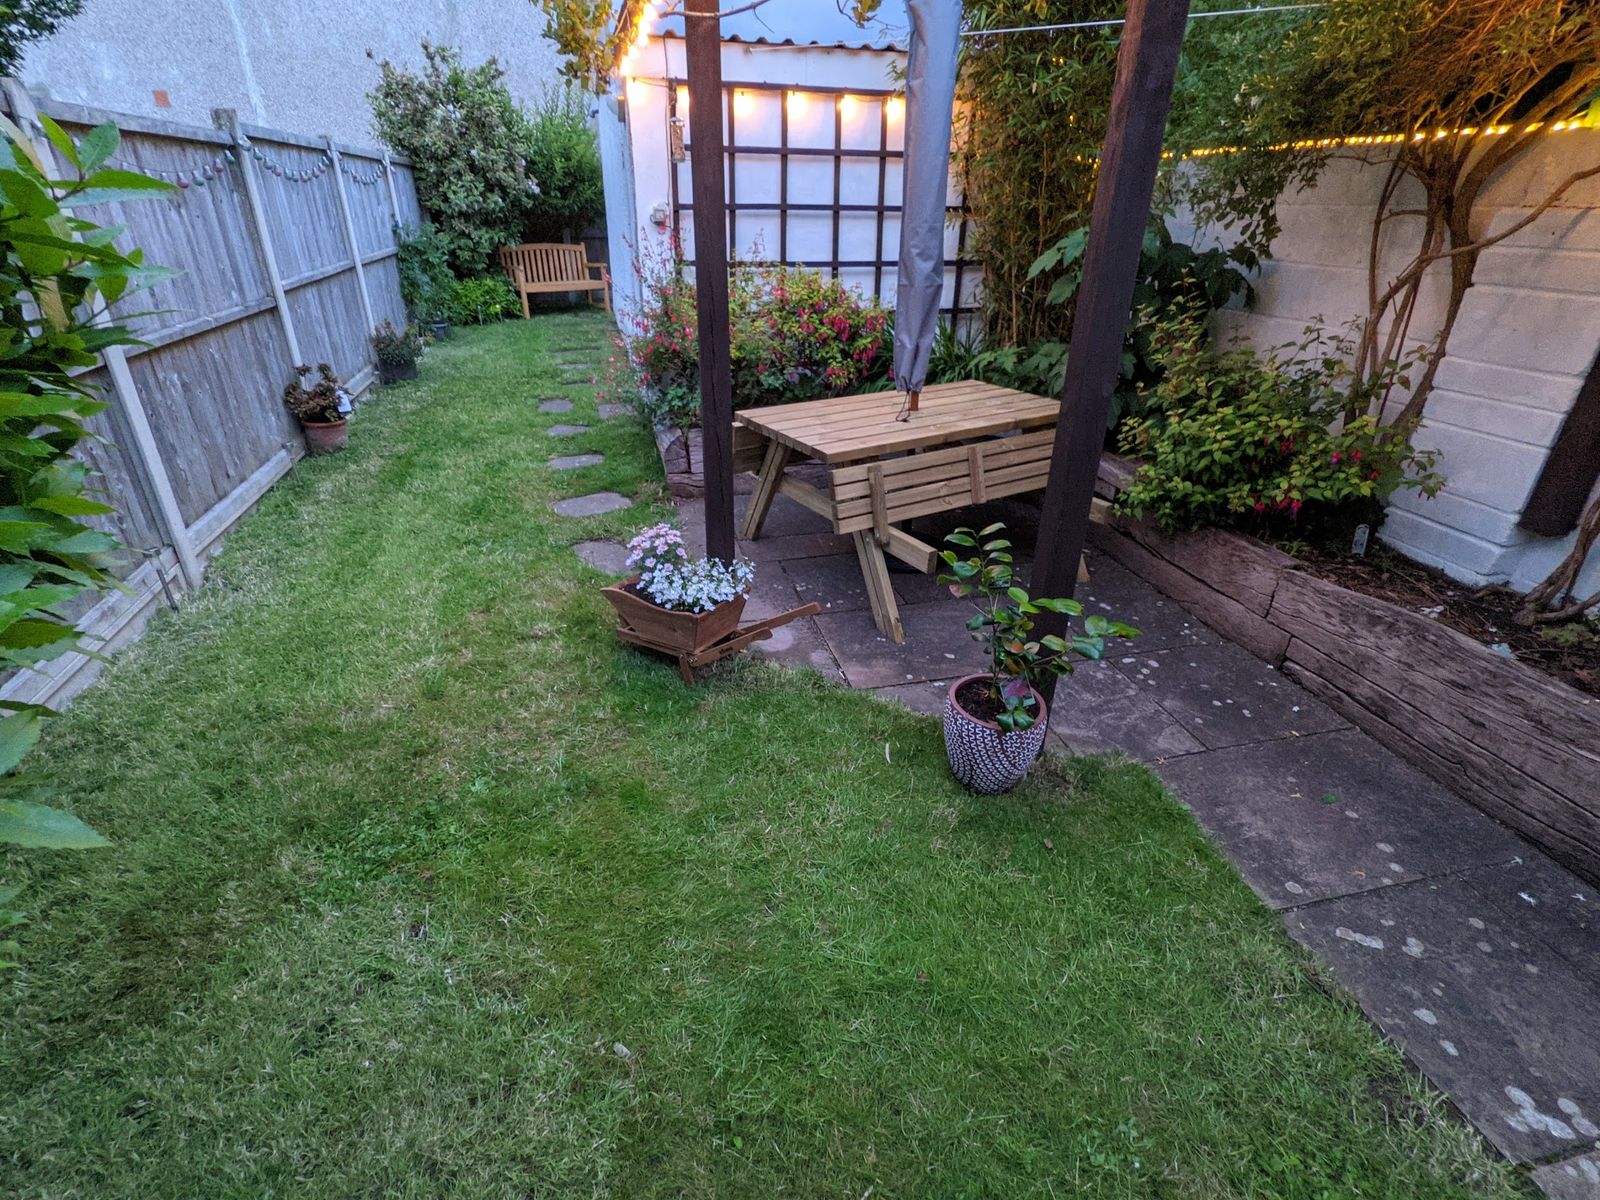 New garden benches and lights